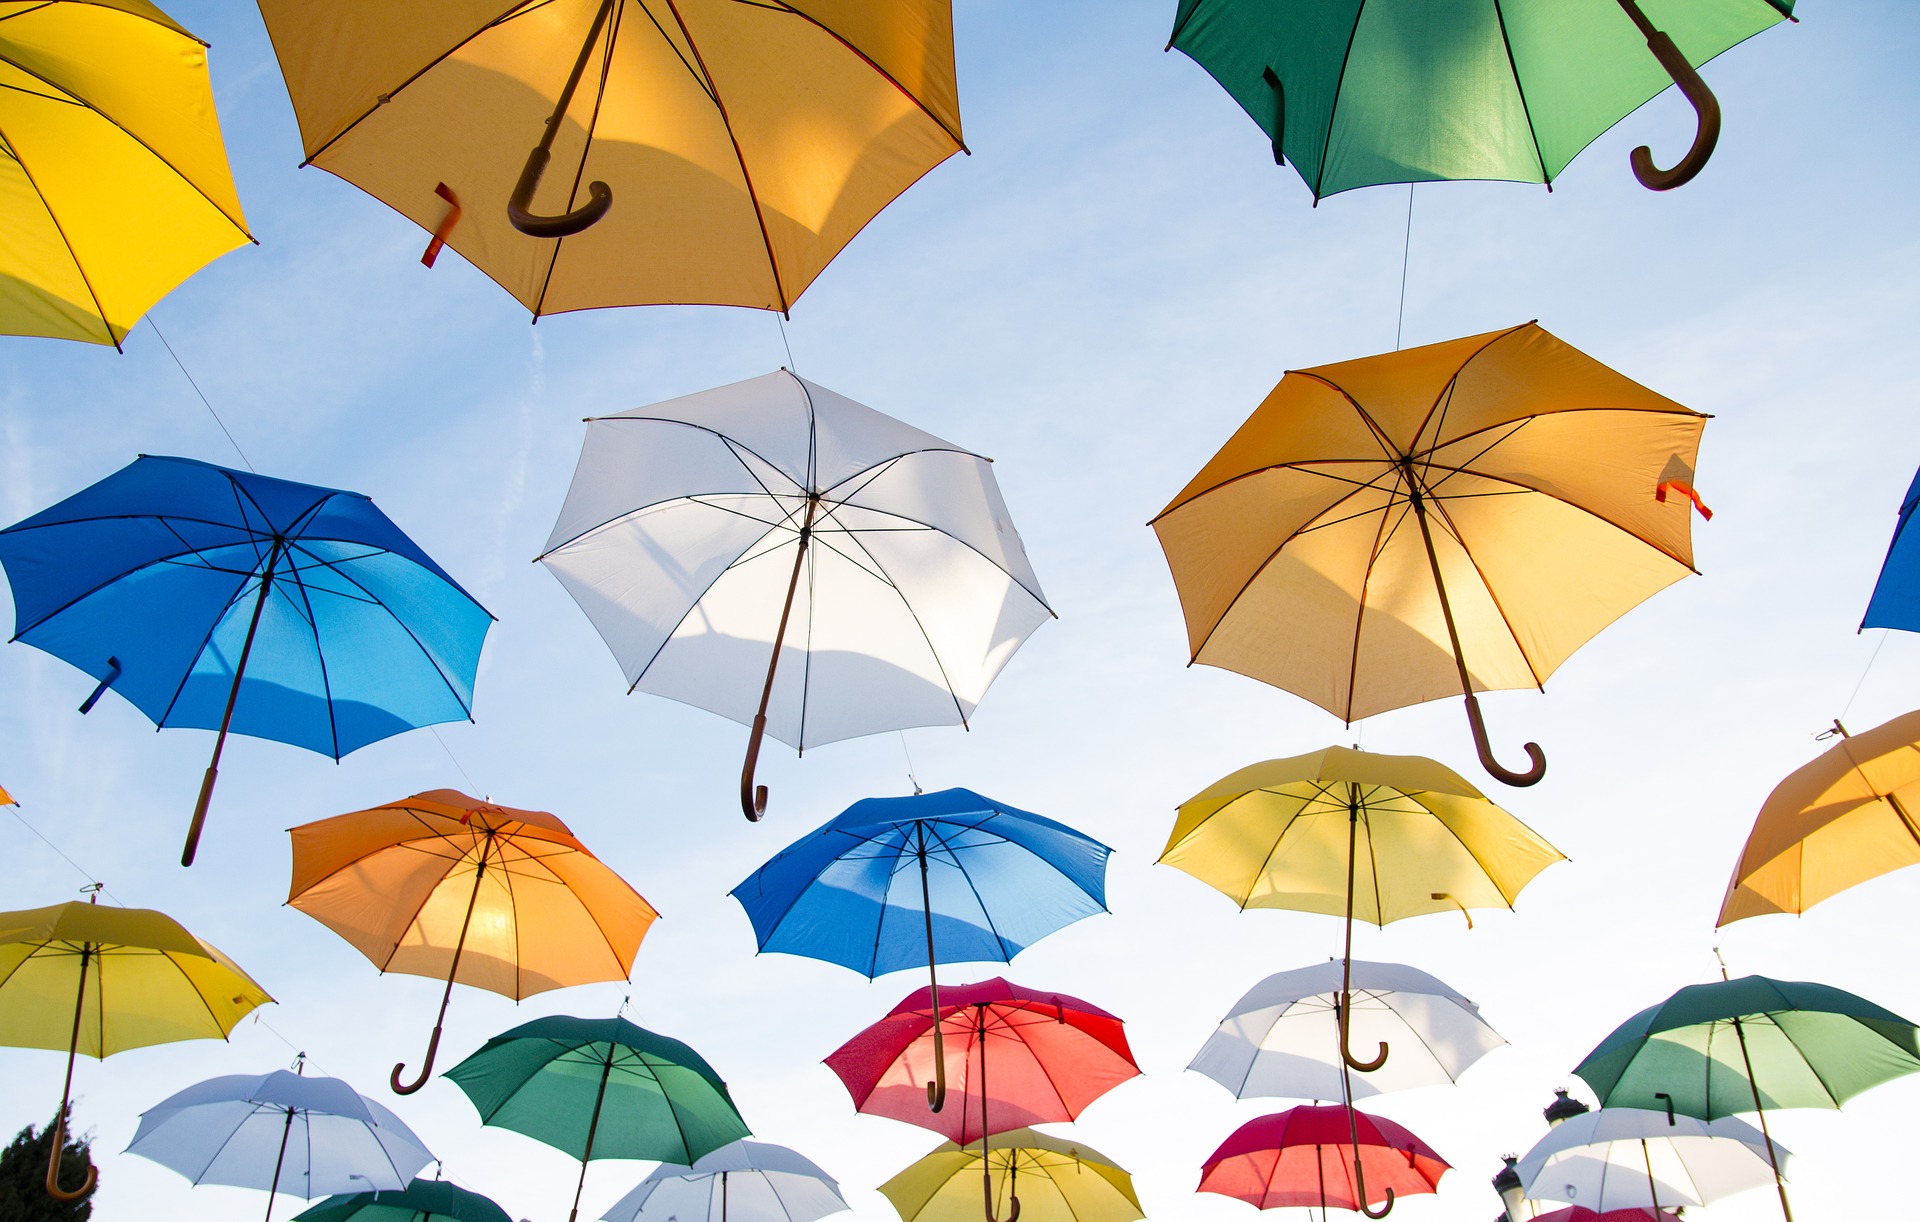 Umbrella Insurance: 7 Things to Know